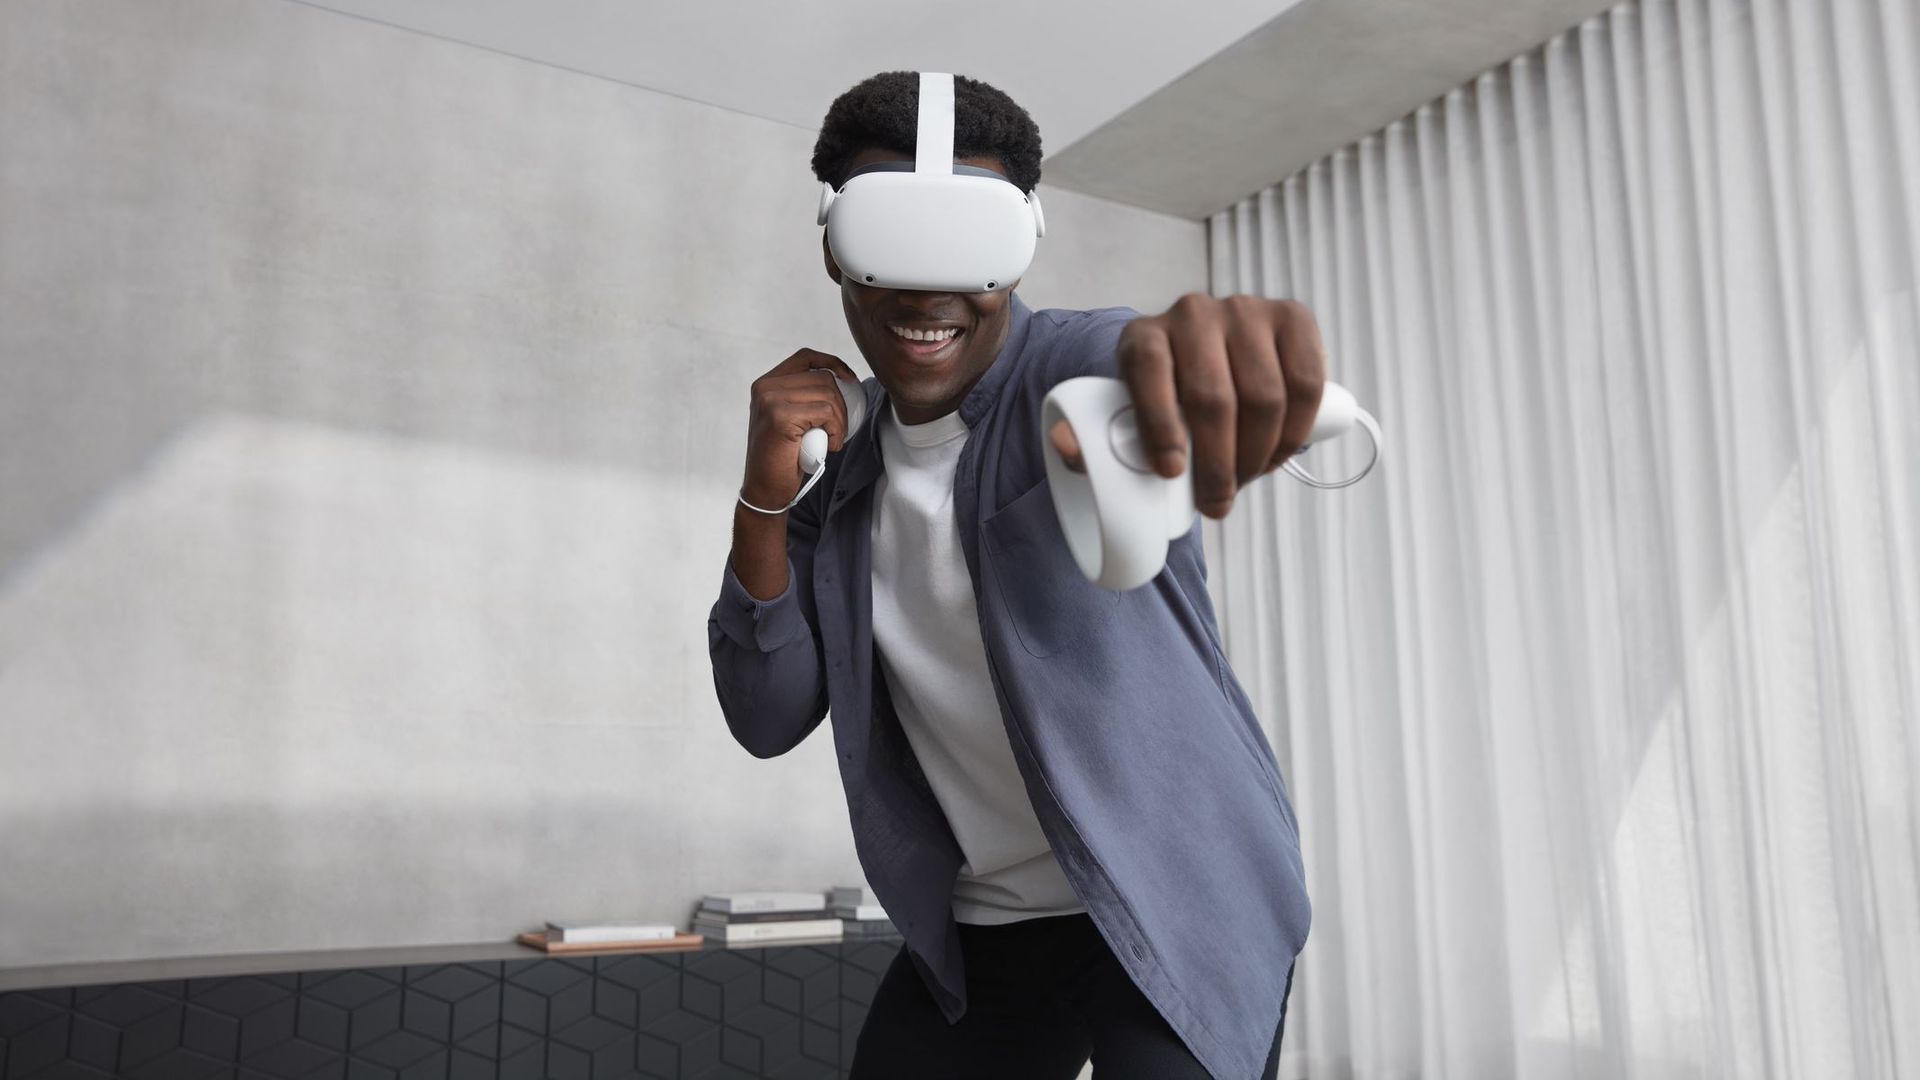 A young man using an Oculus Quest 2 VR headset